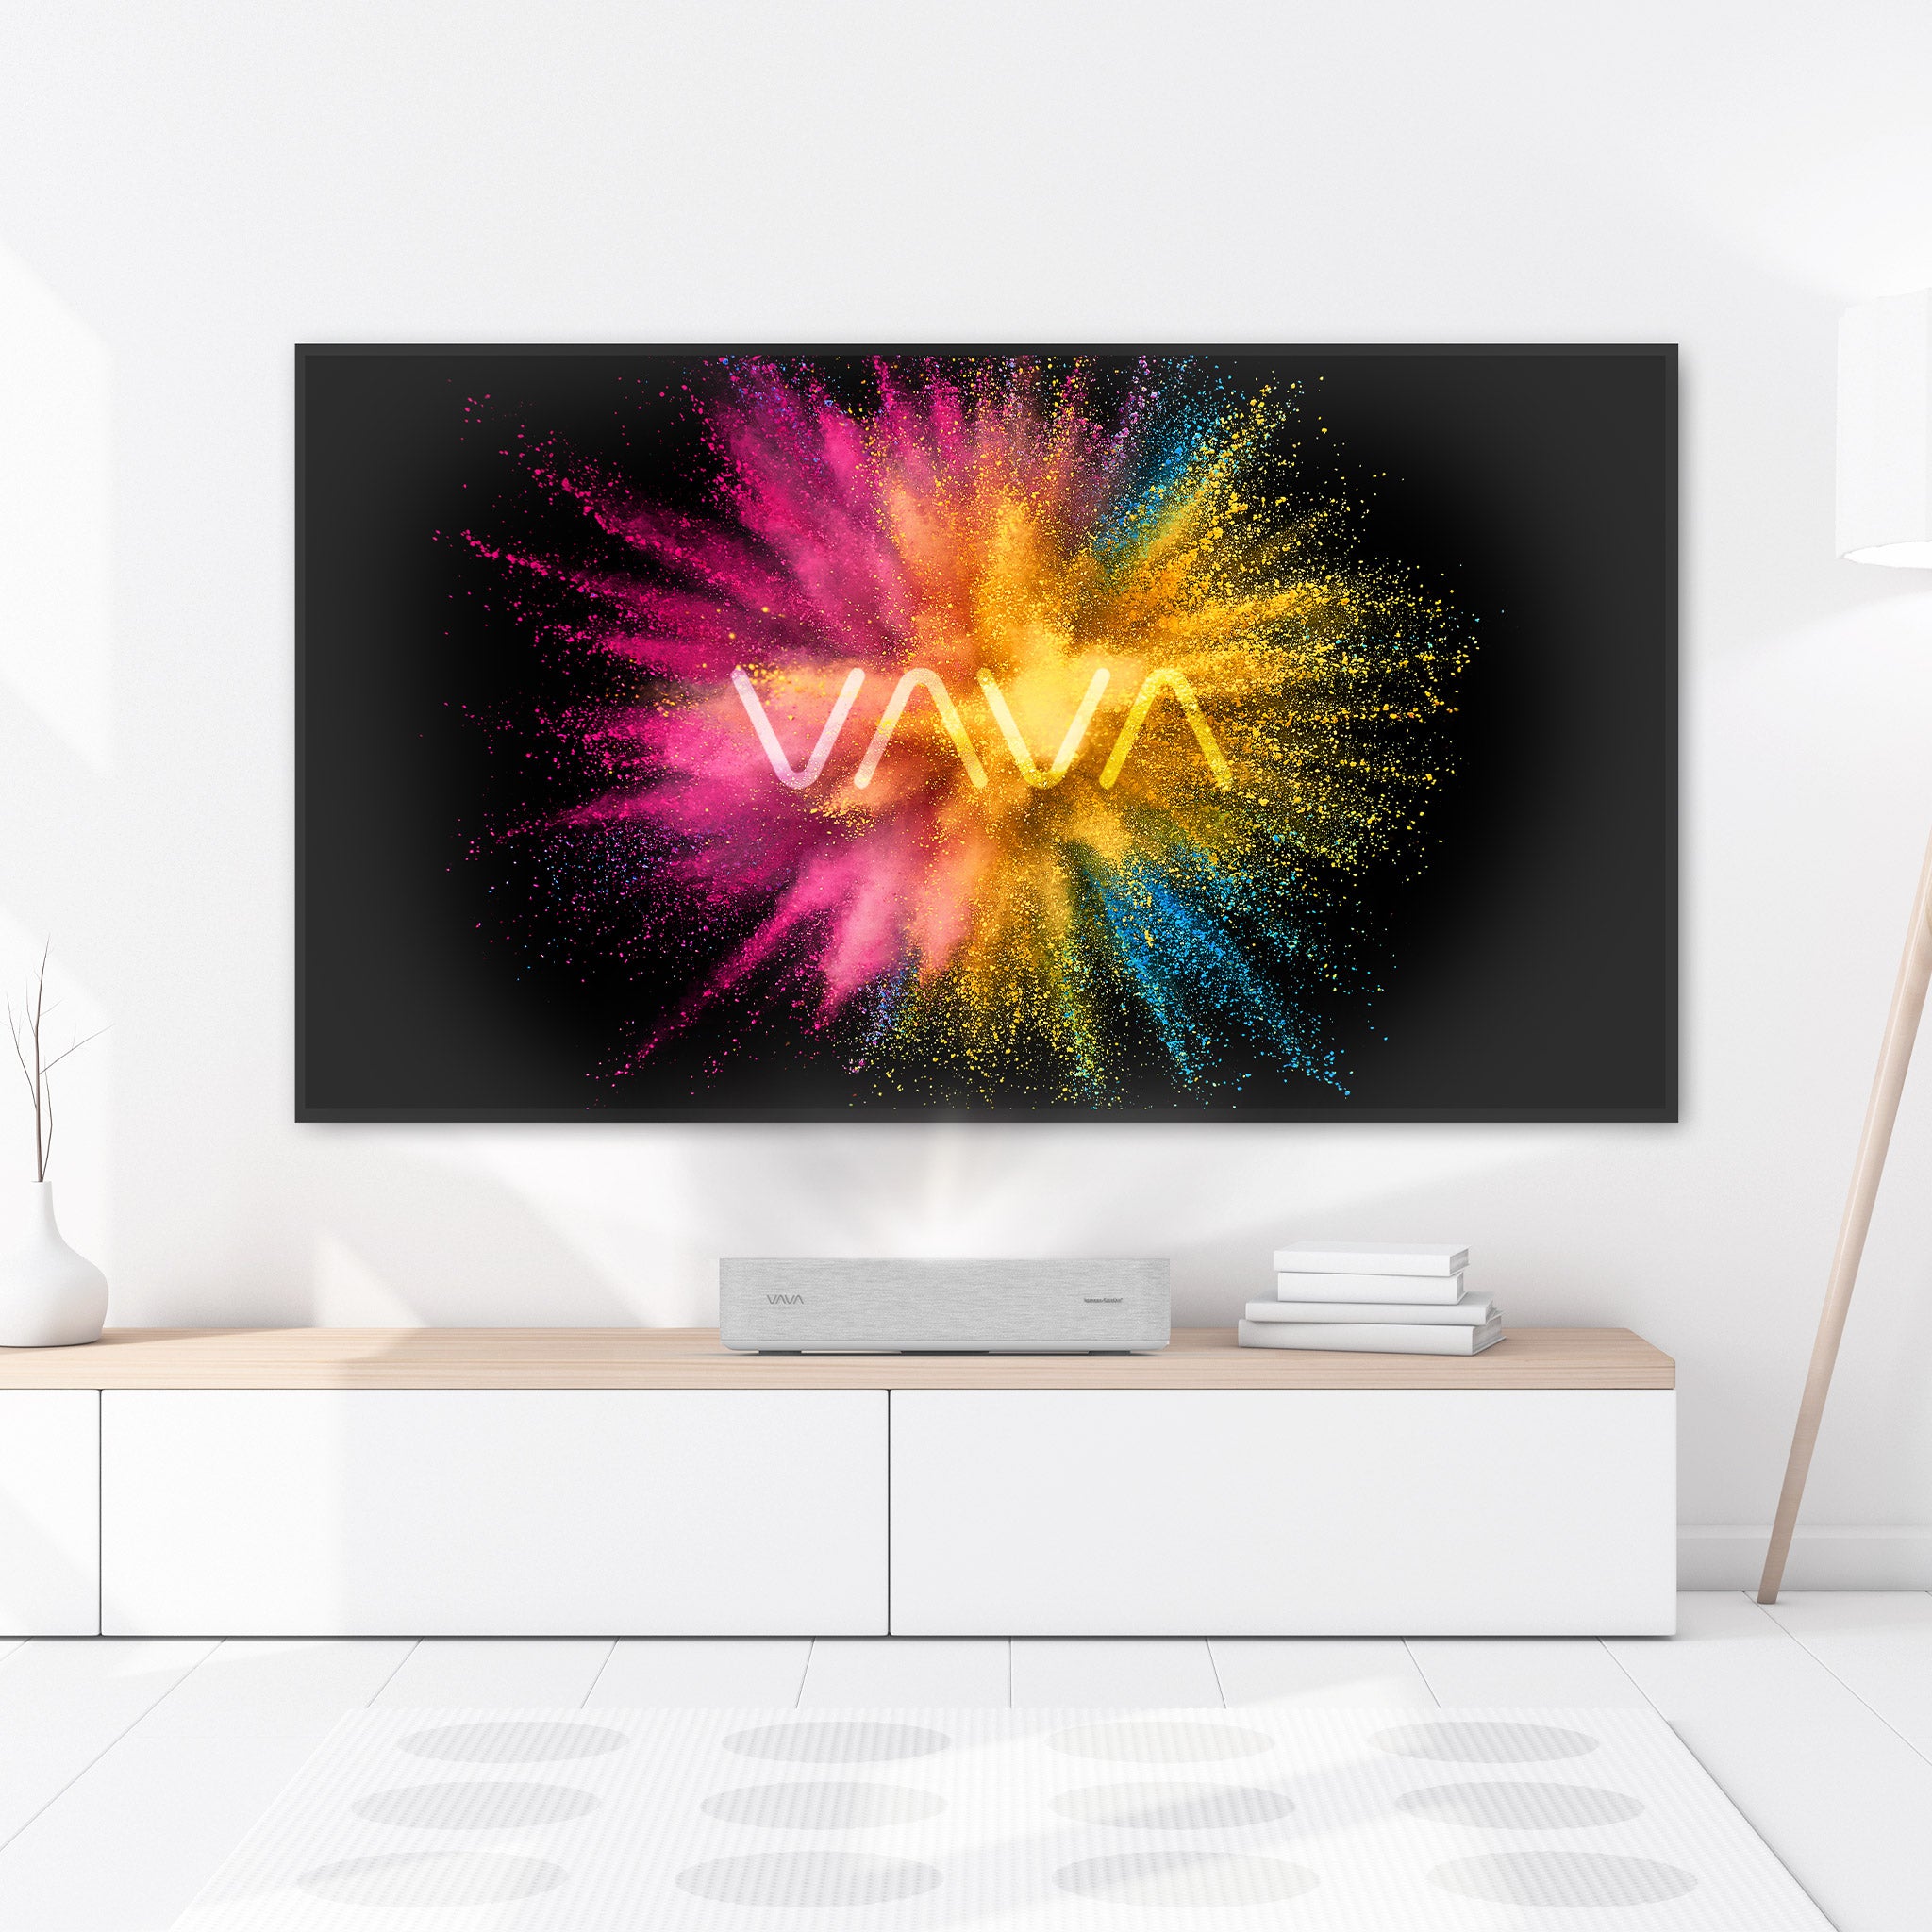 VAVA 4K Laser TV projector on a white and wood table, ALR screen pro with the VAVA logo on the screen